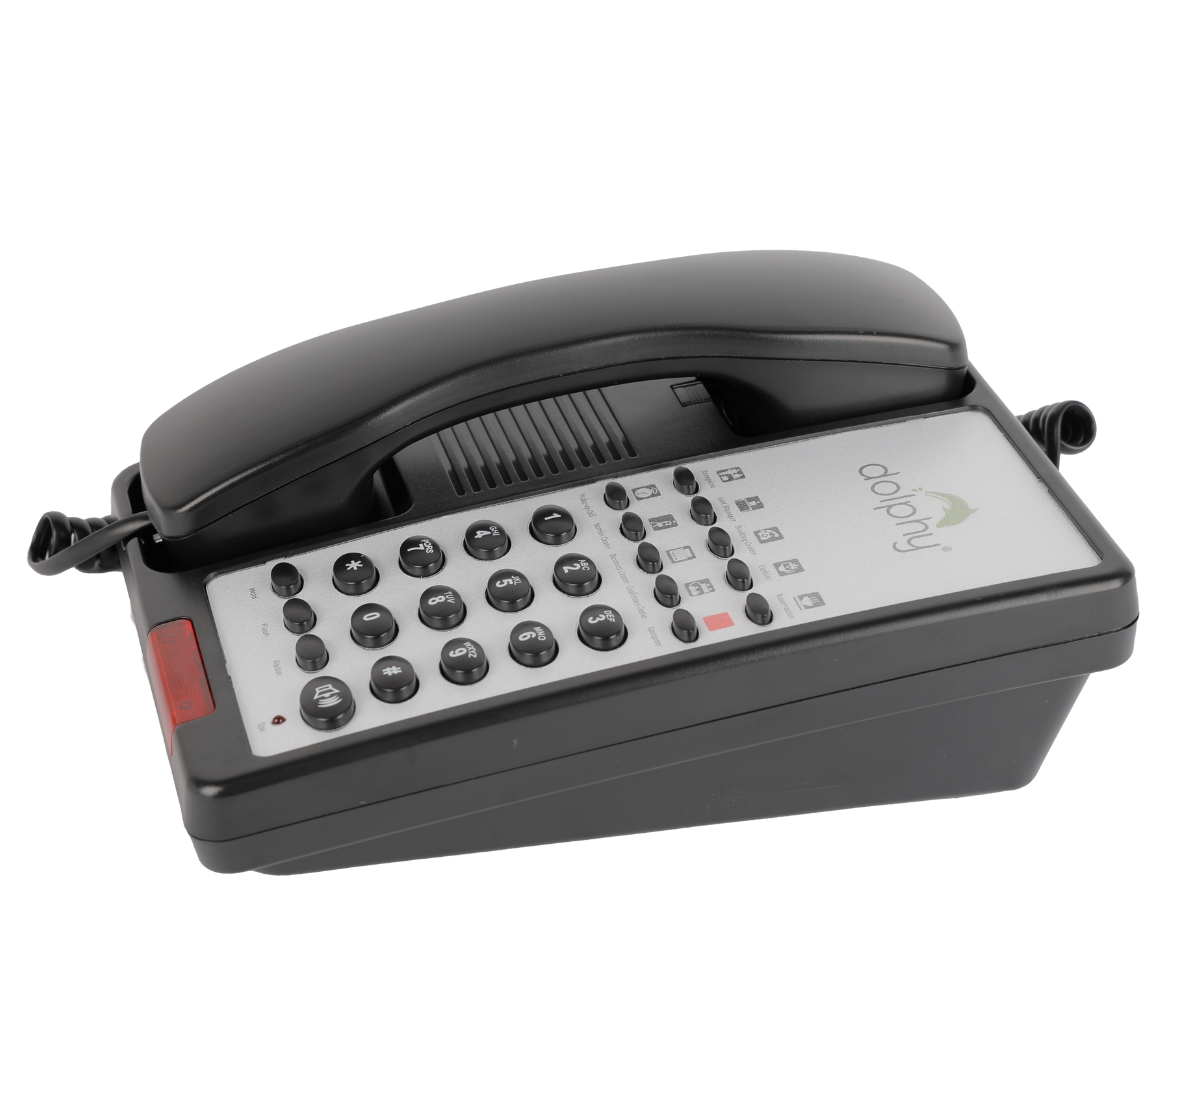 High Quality Top Security Hotel Guestroom Telephone
